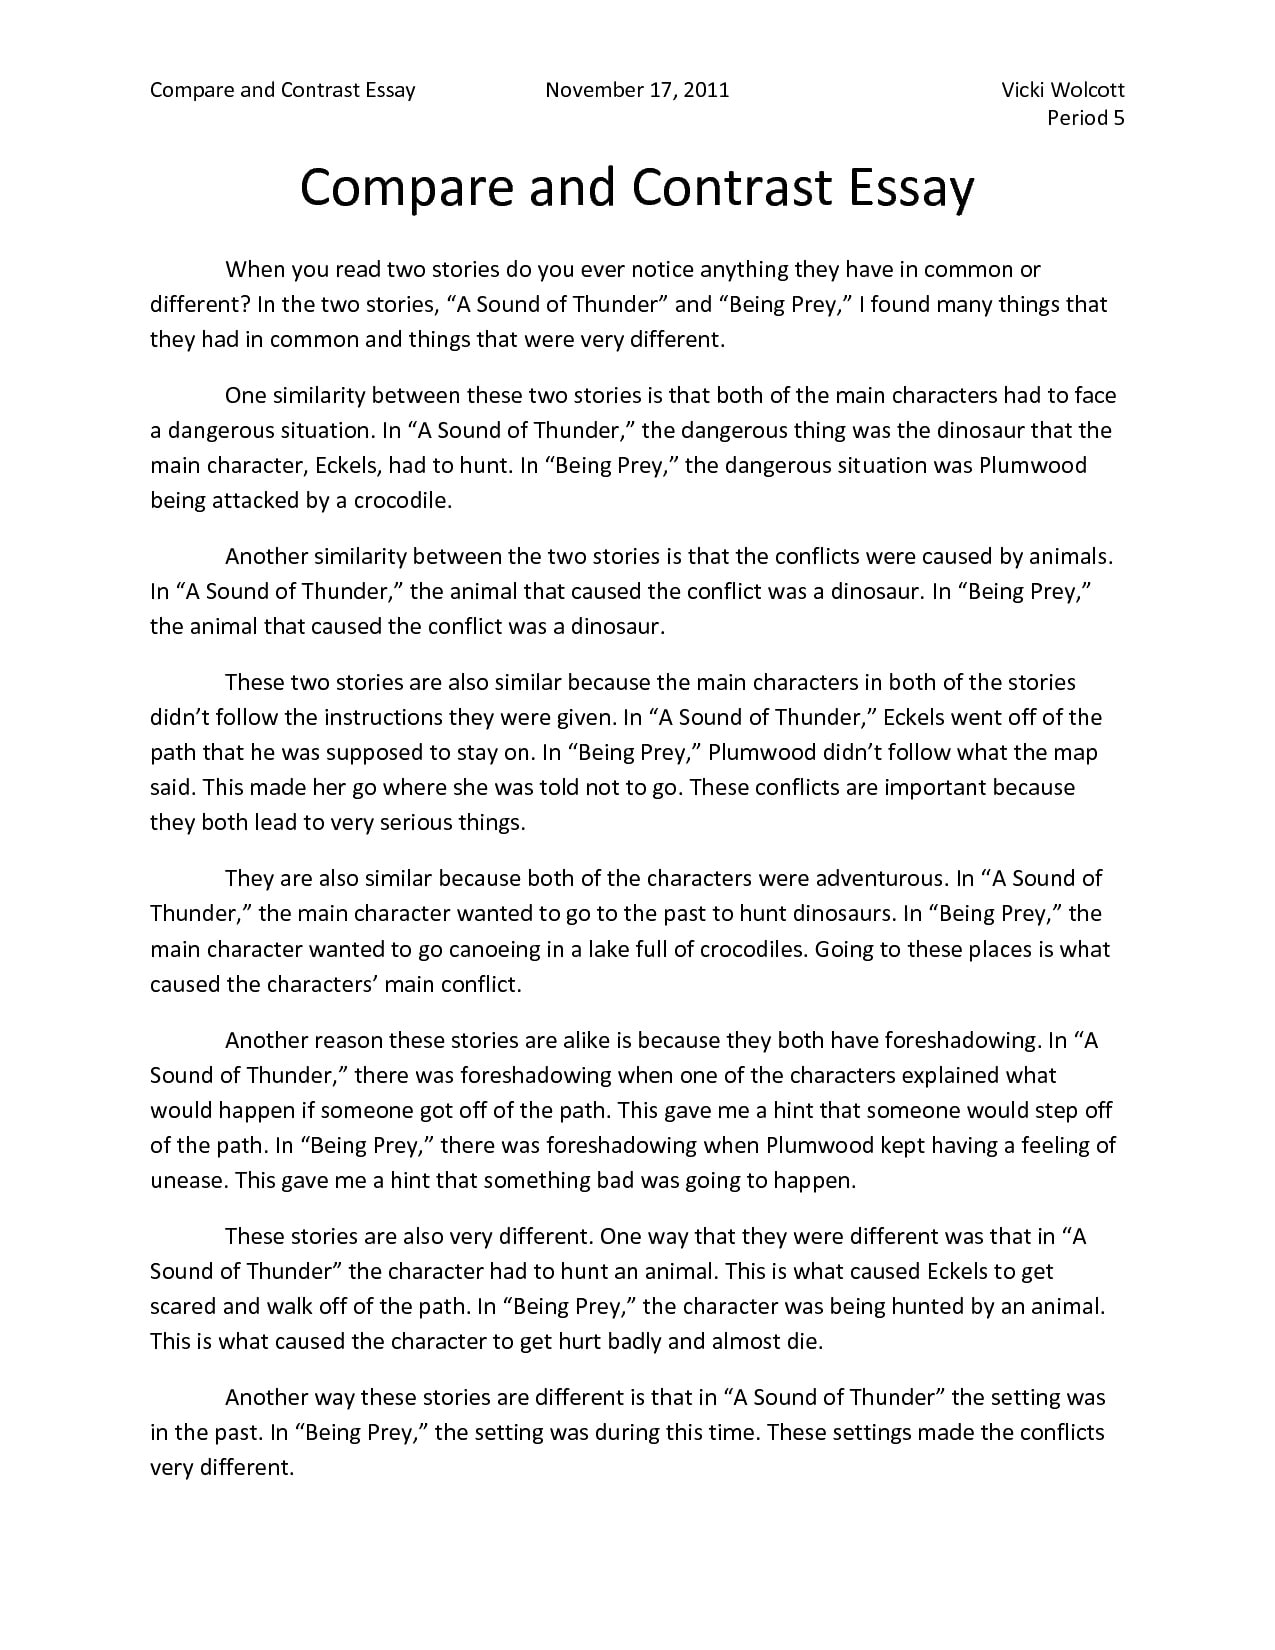 Comparing and contrasting essays